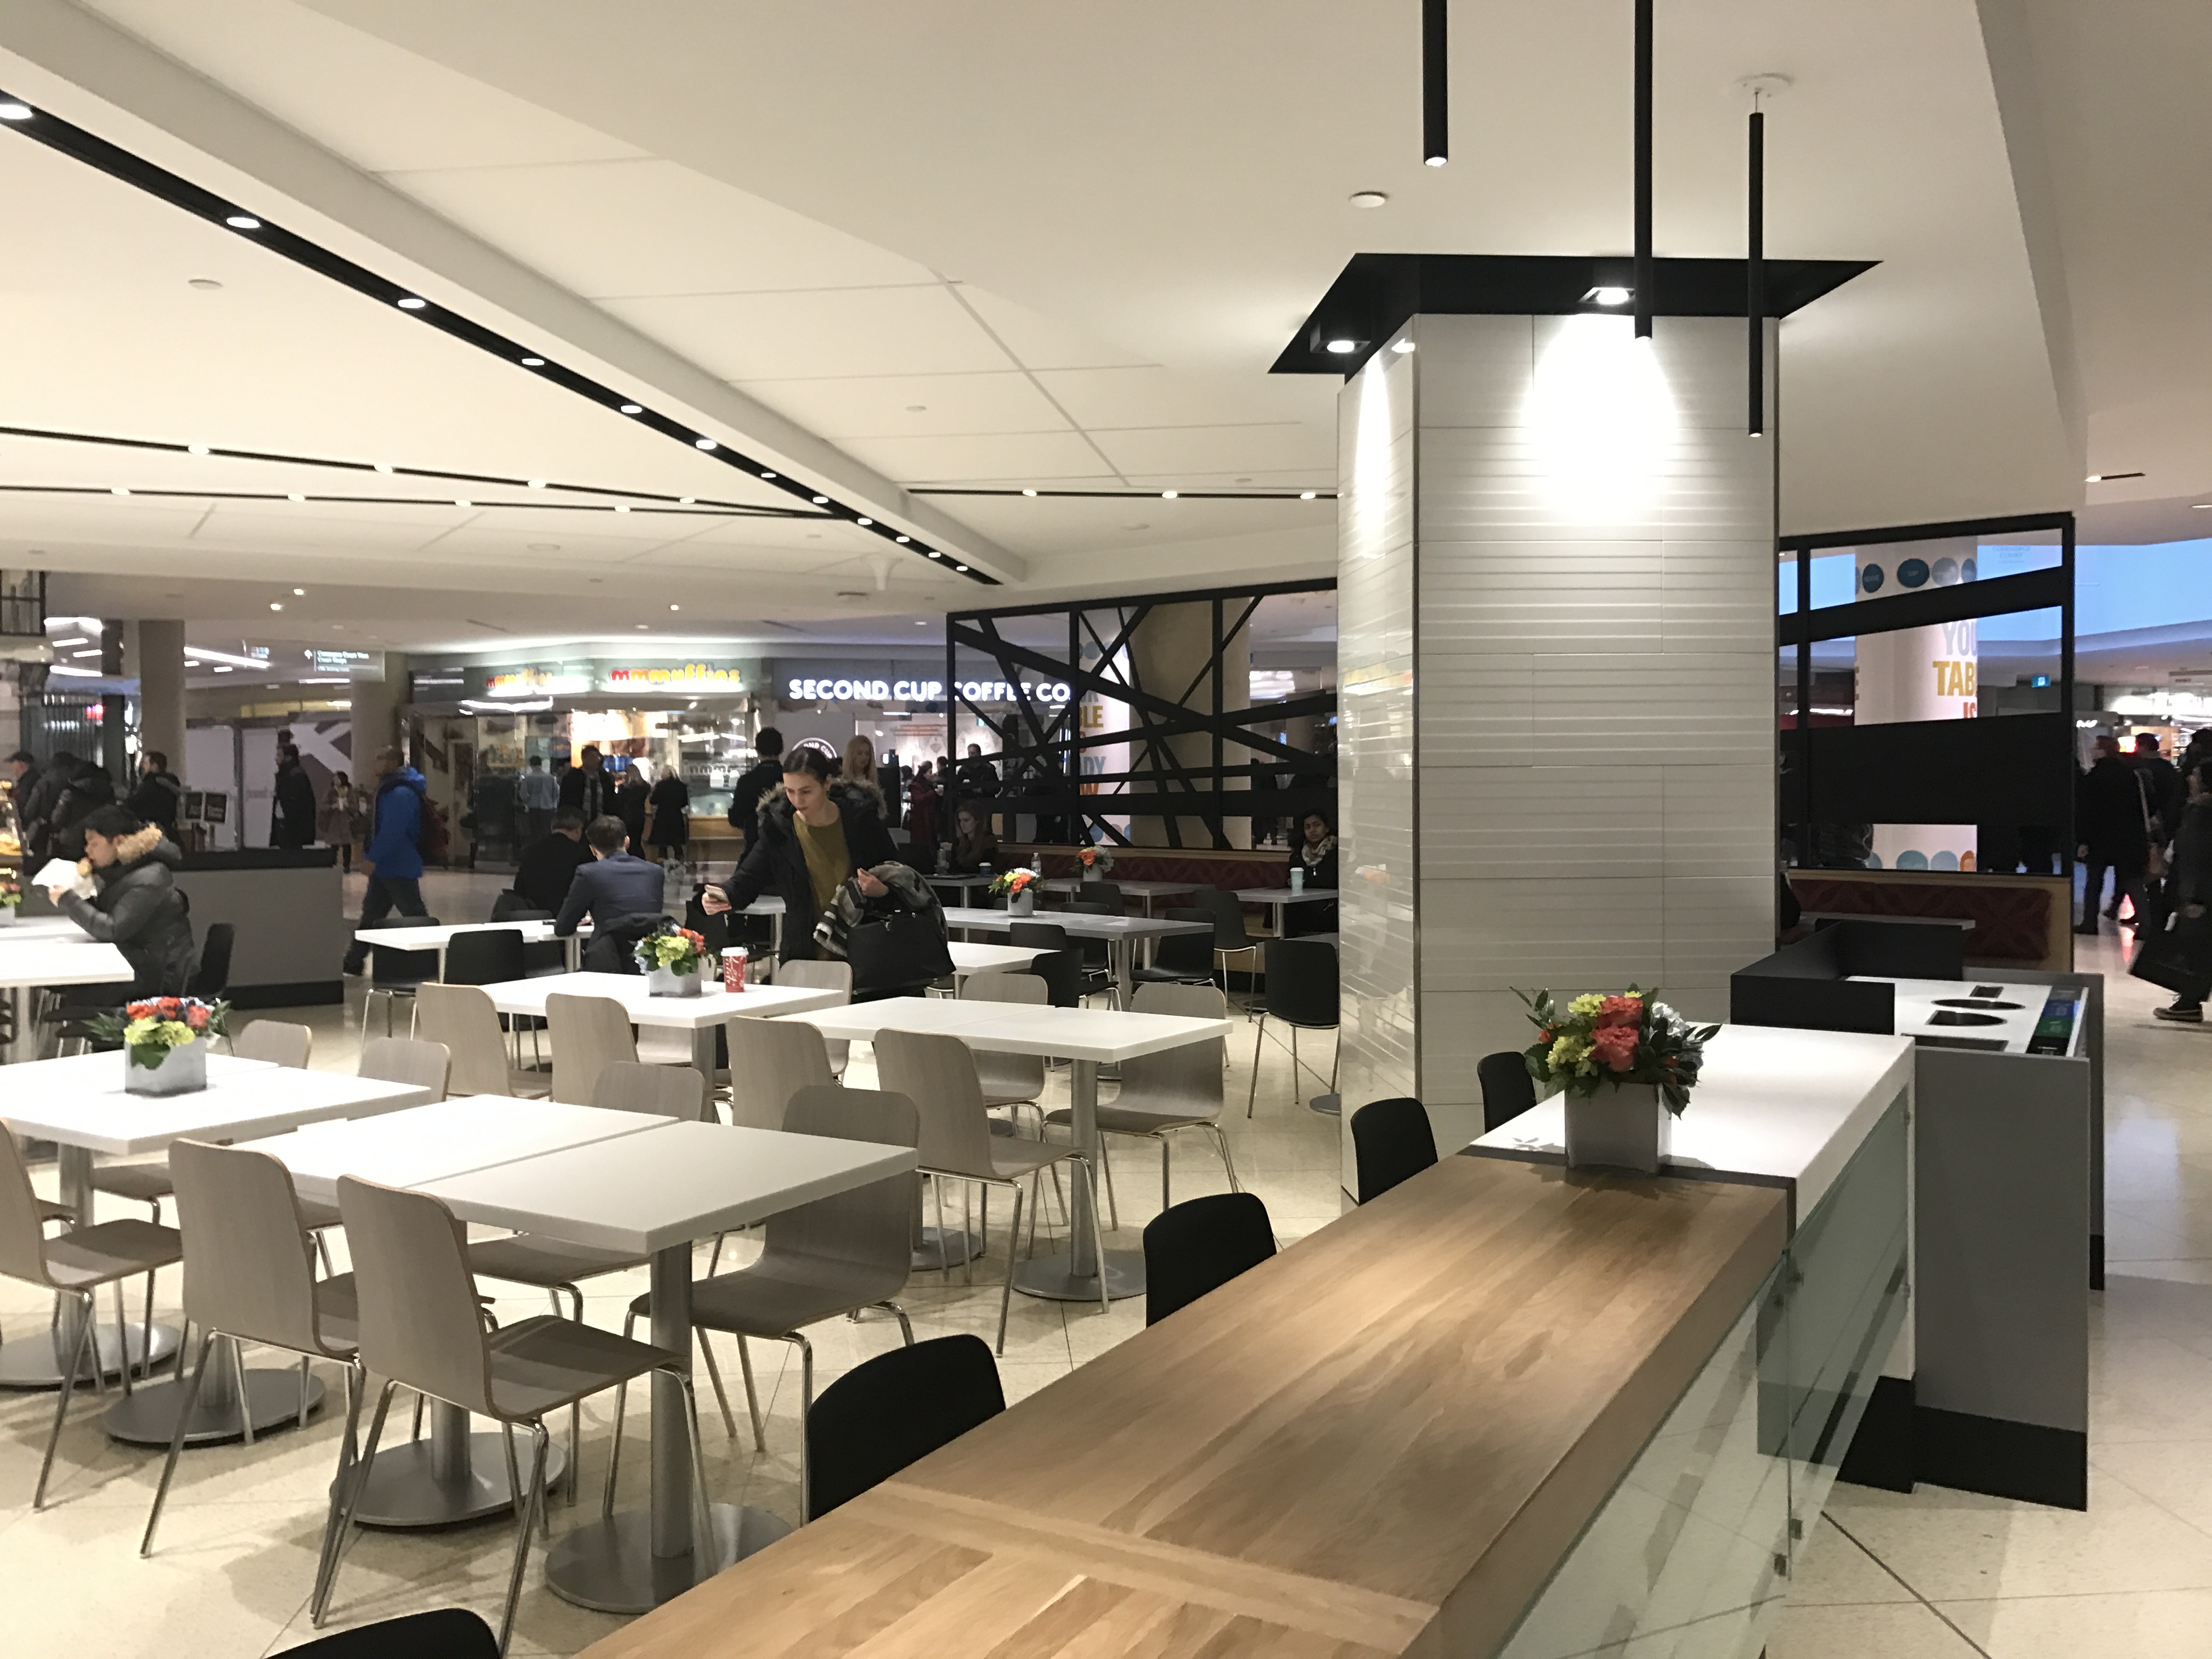 Commerce Court (Toronto) Food Court Seating Area is Now Open